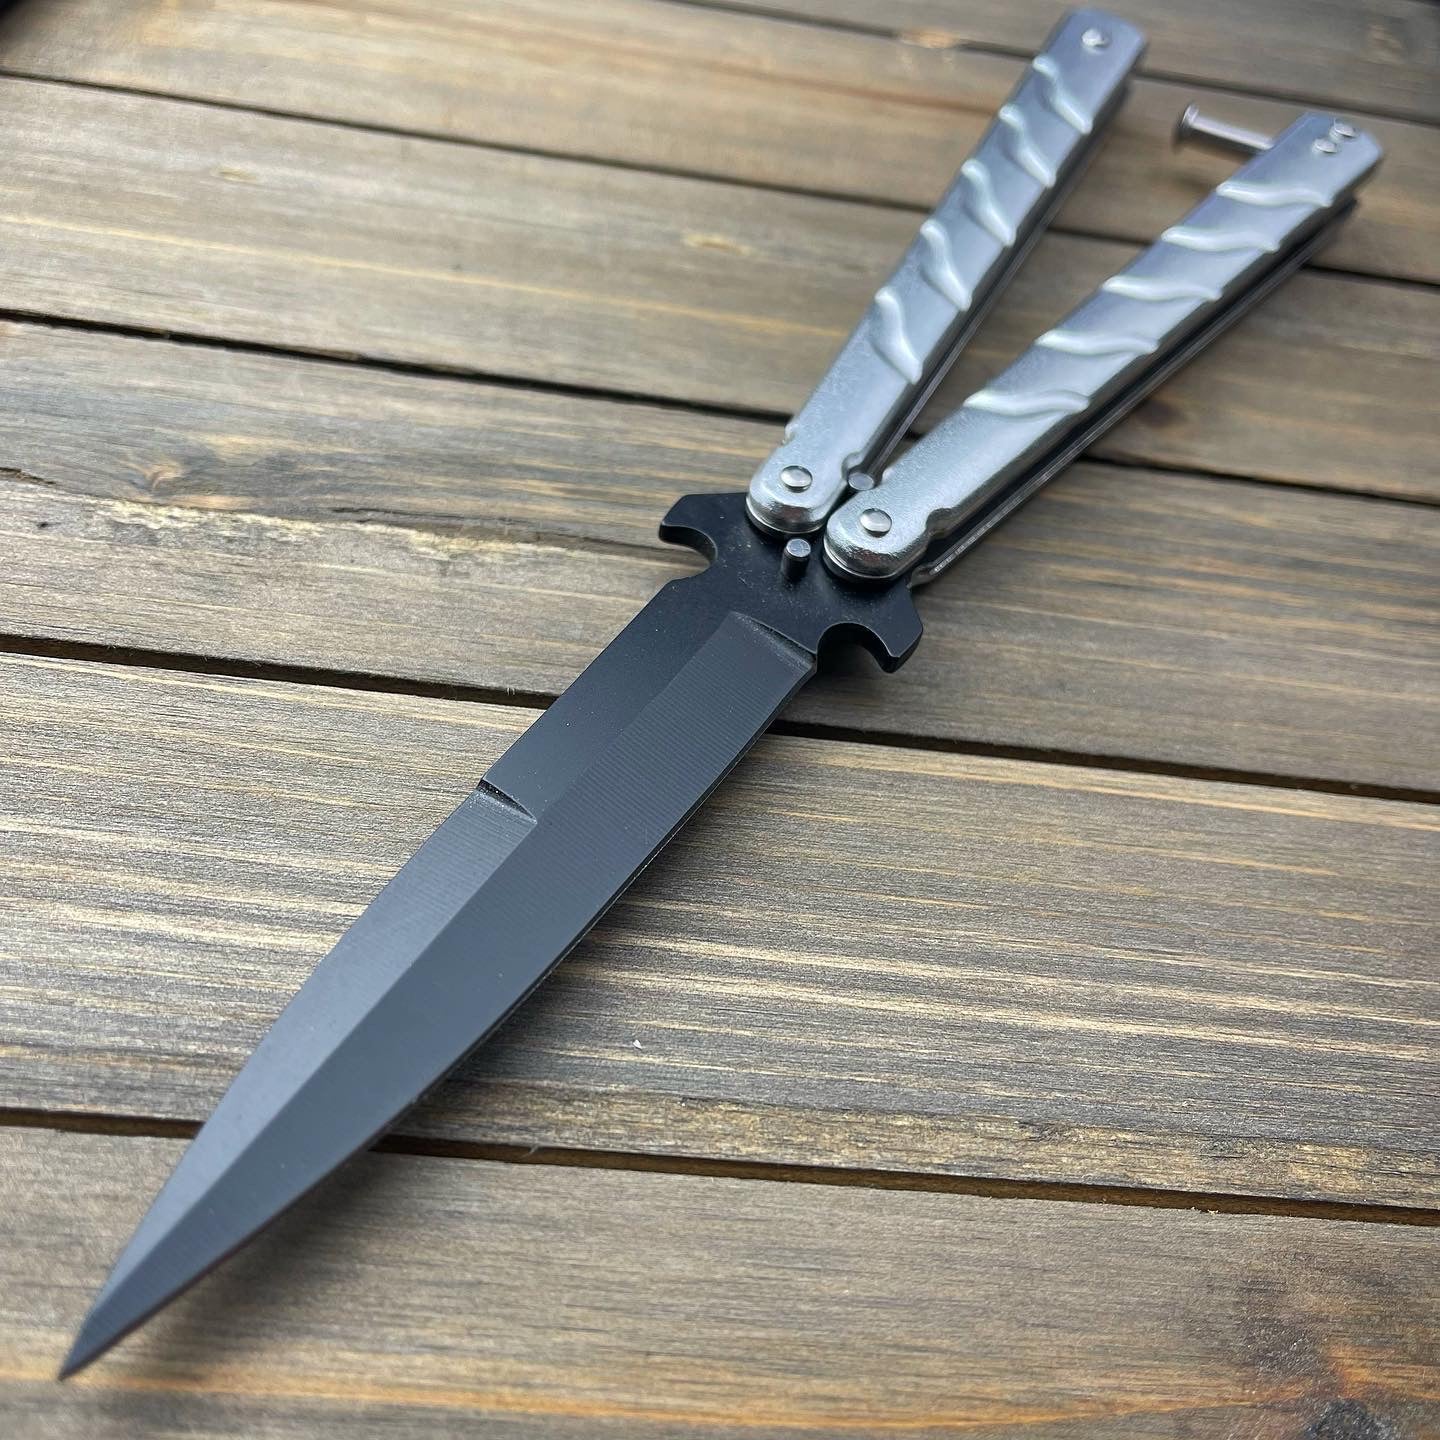 The HELIX Butterfly Knives